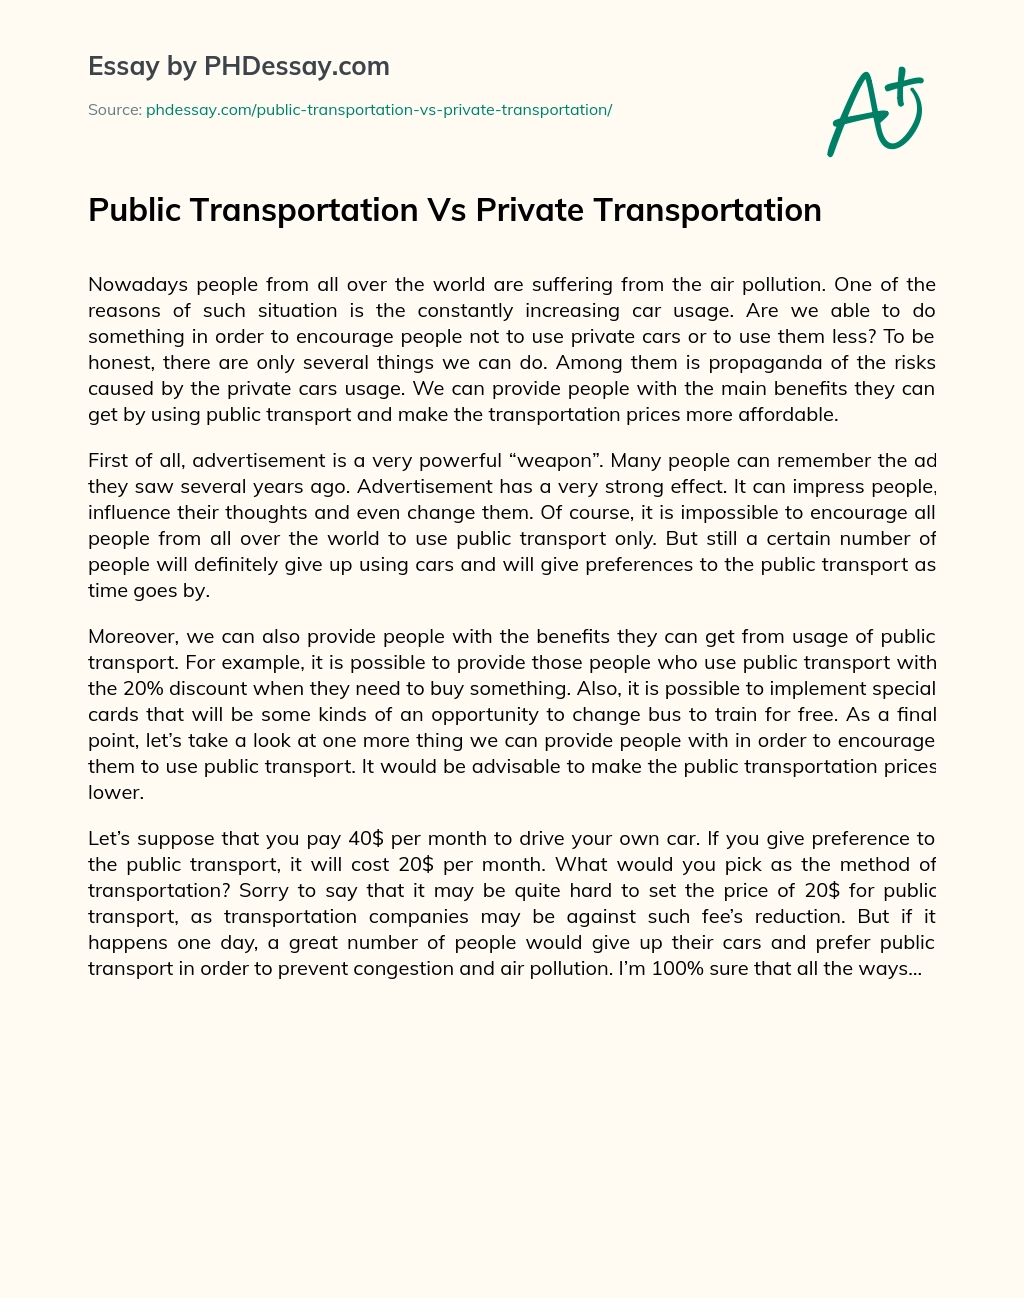 compare and contrast public and private transportation essay